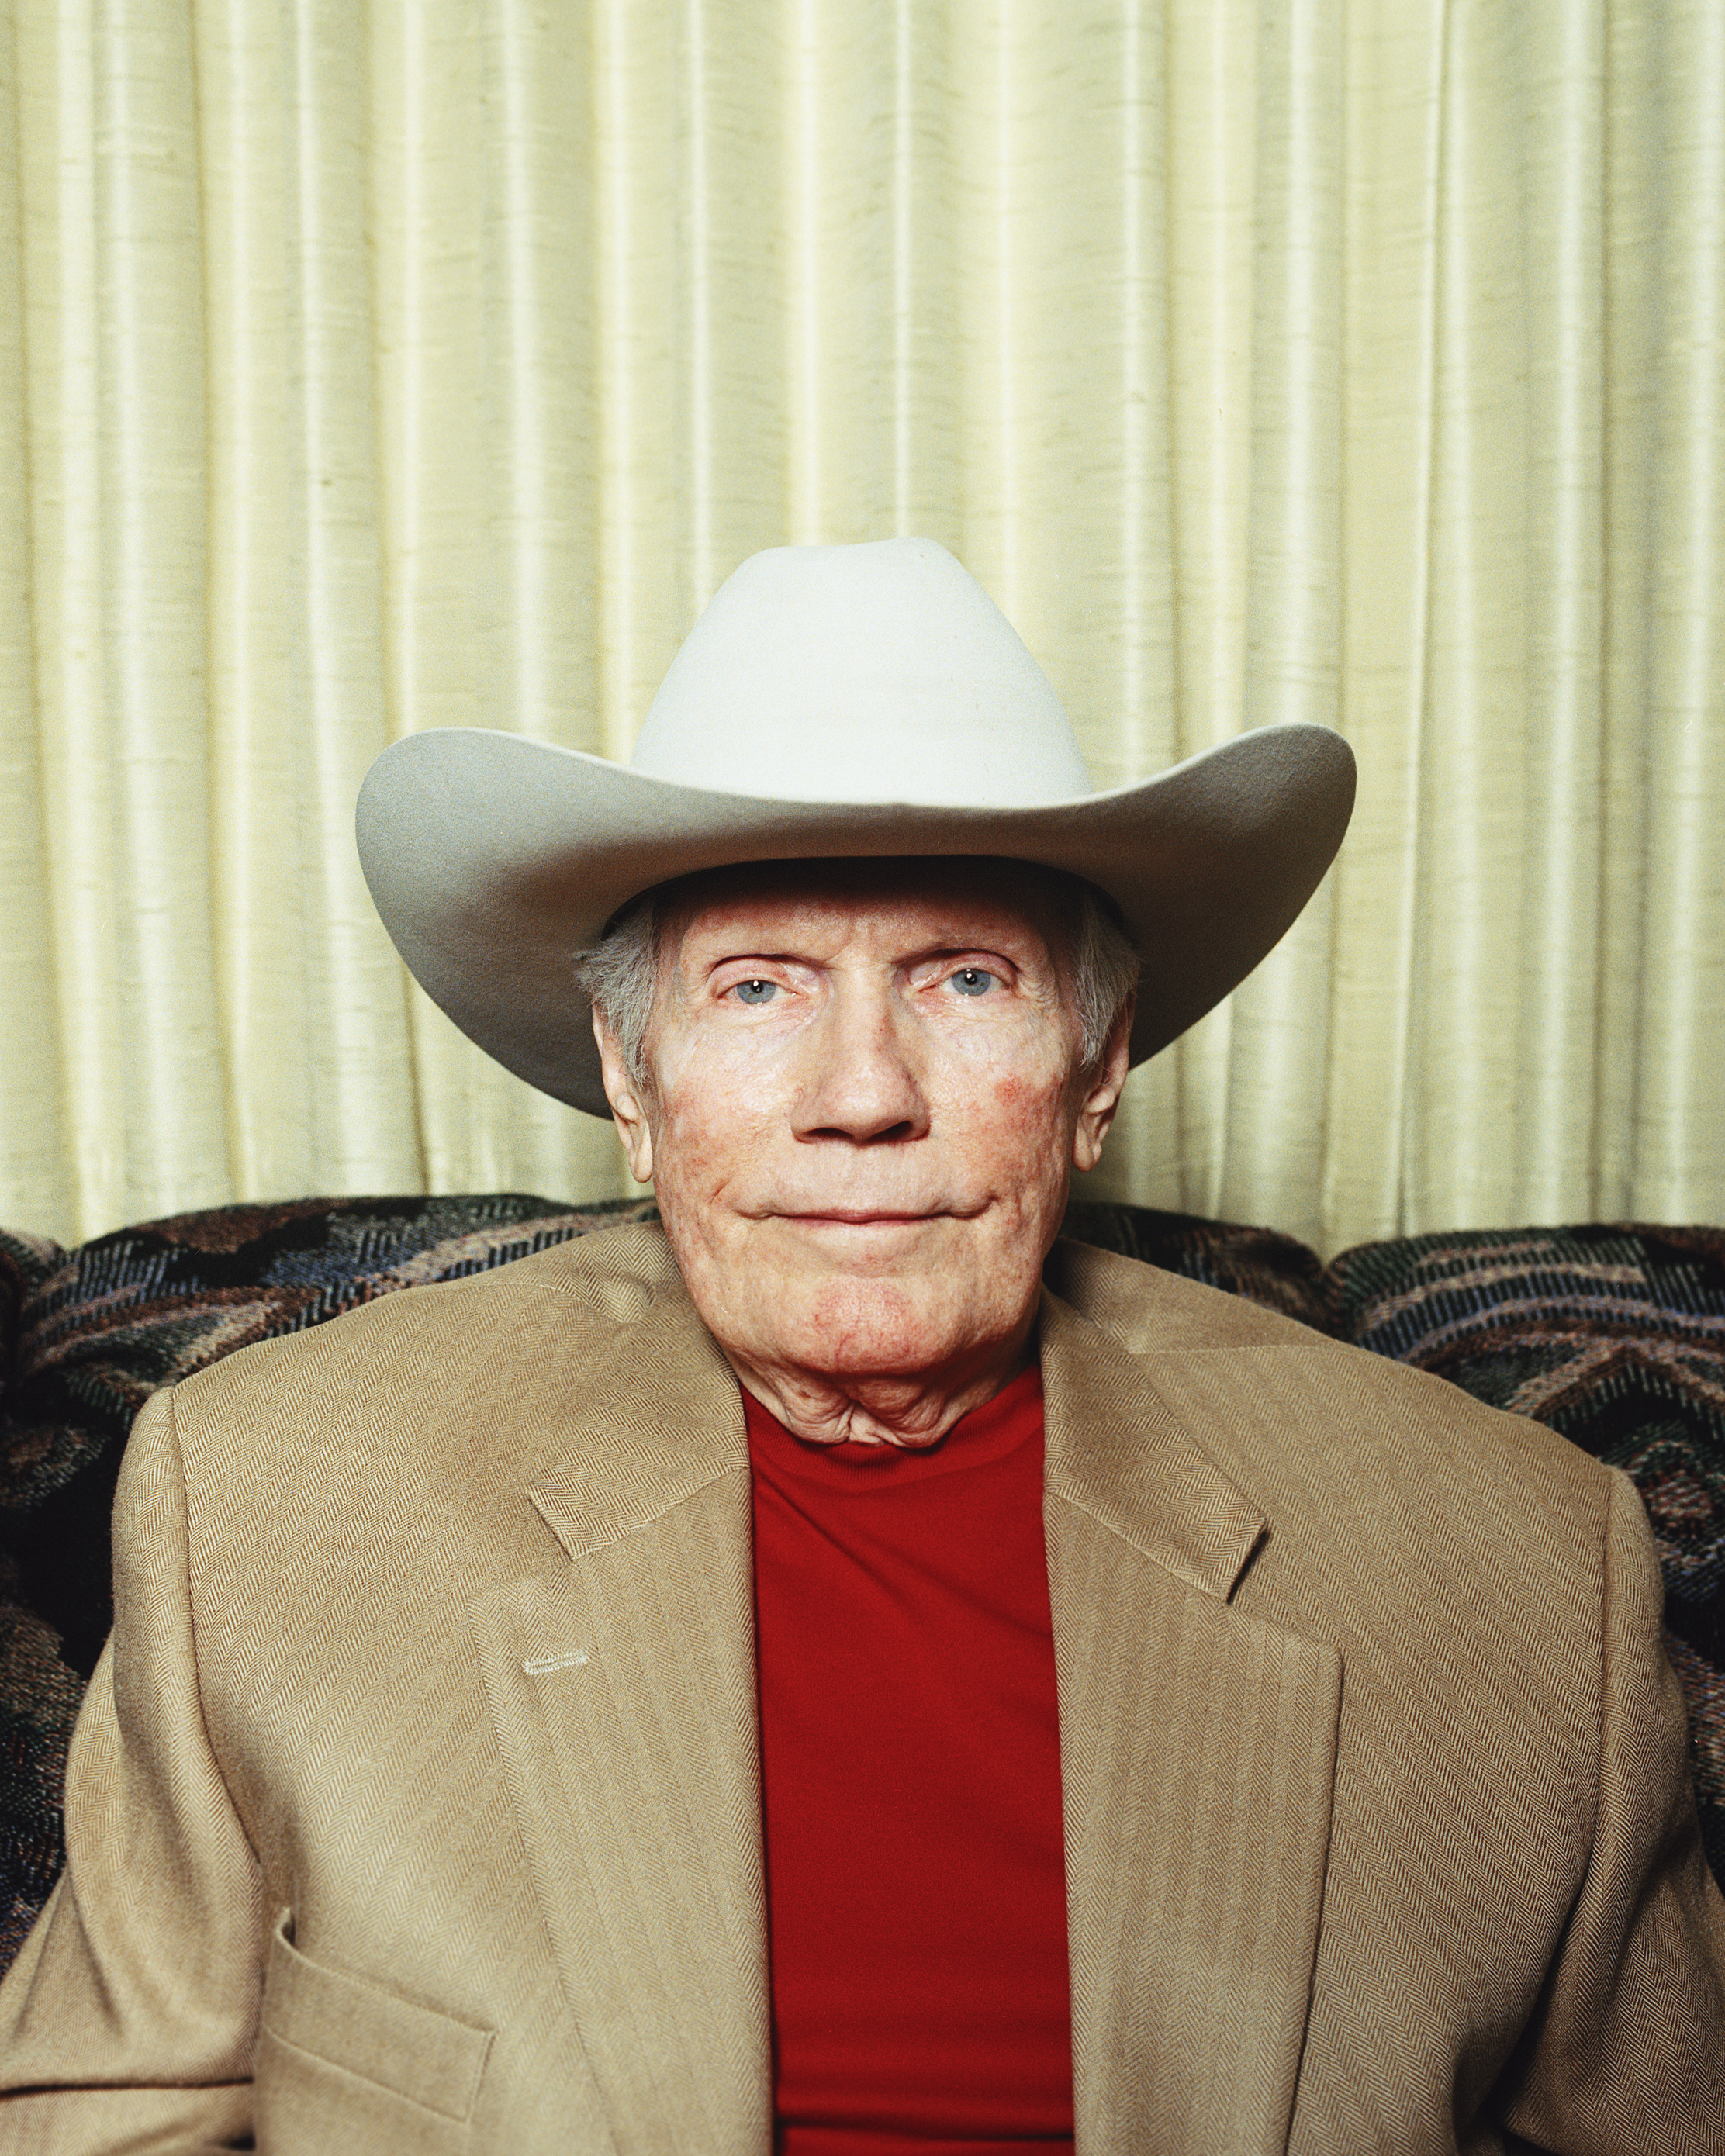 Phelps, photographed in 2010, died on March 20 at age 84